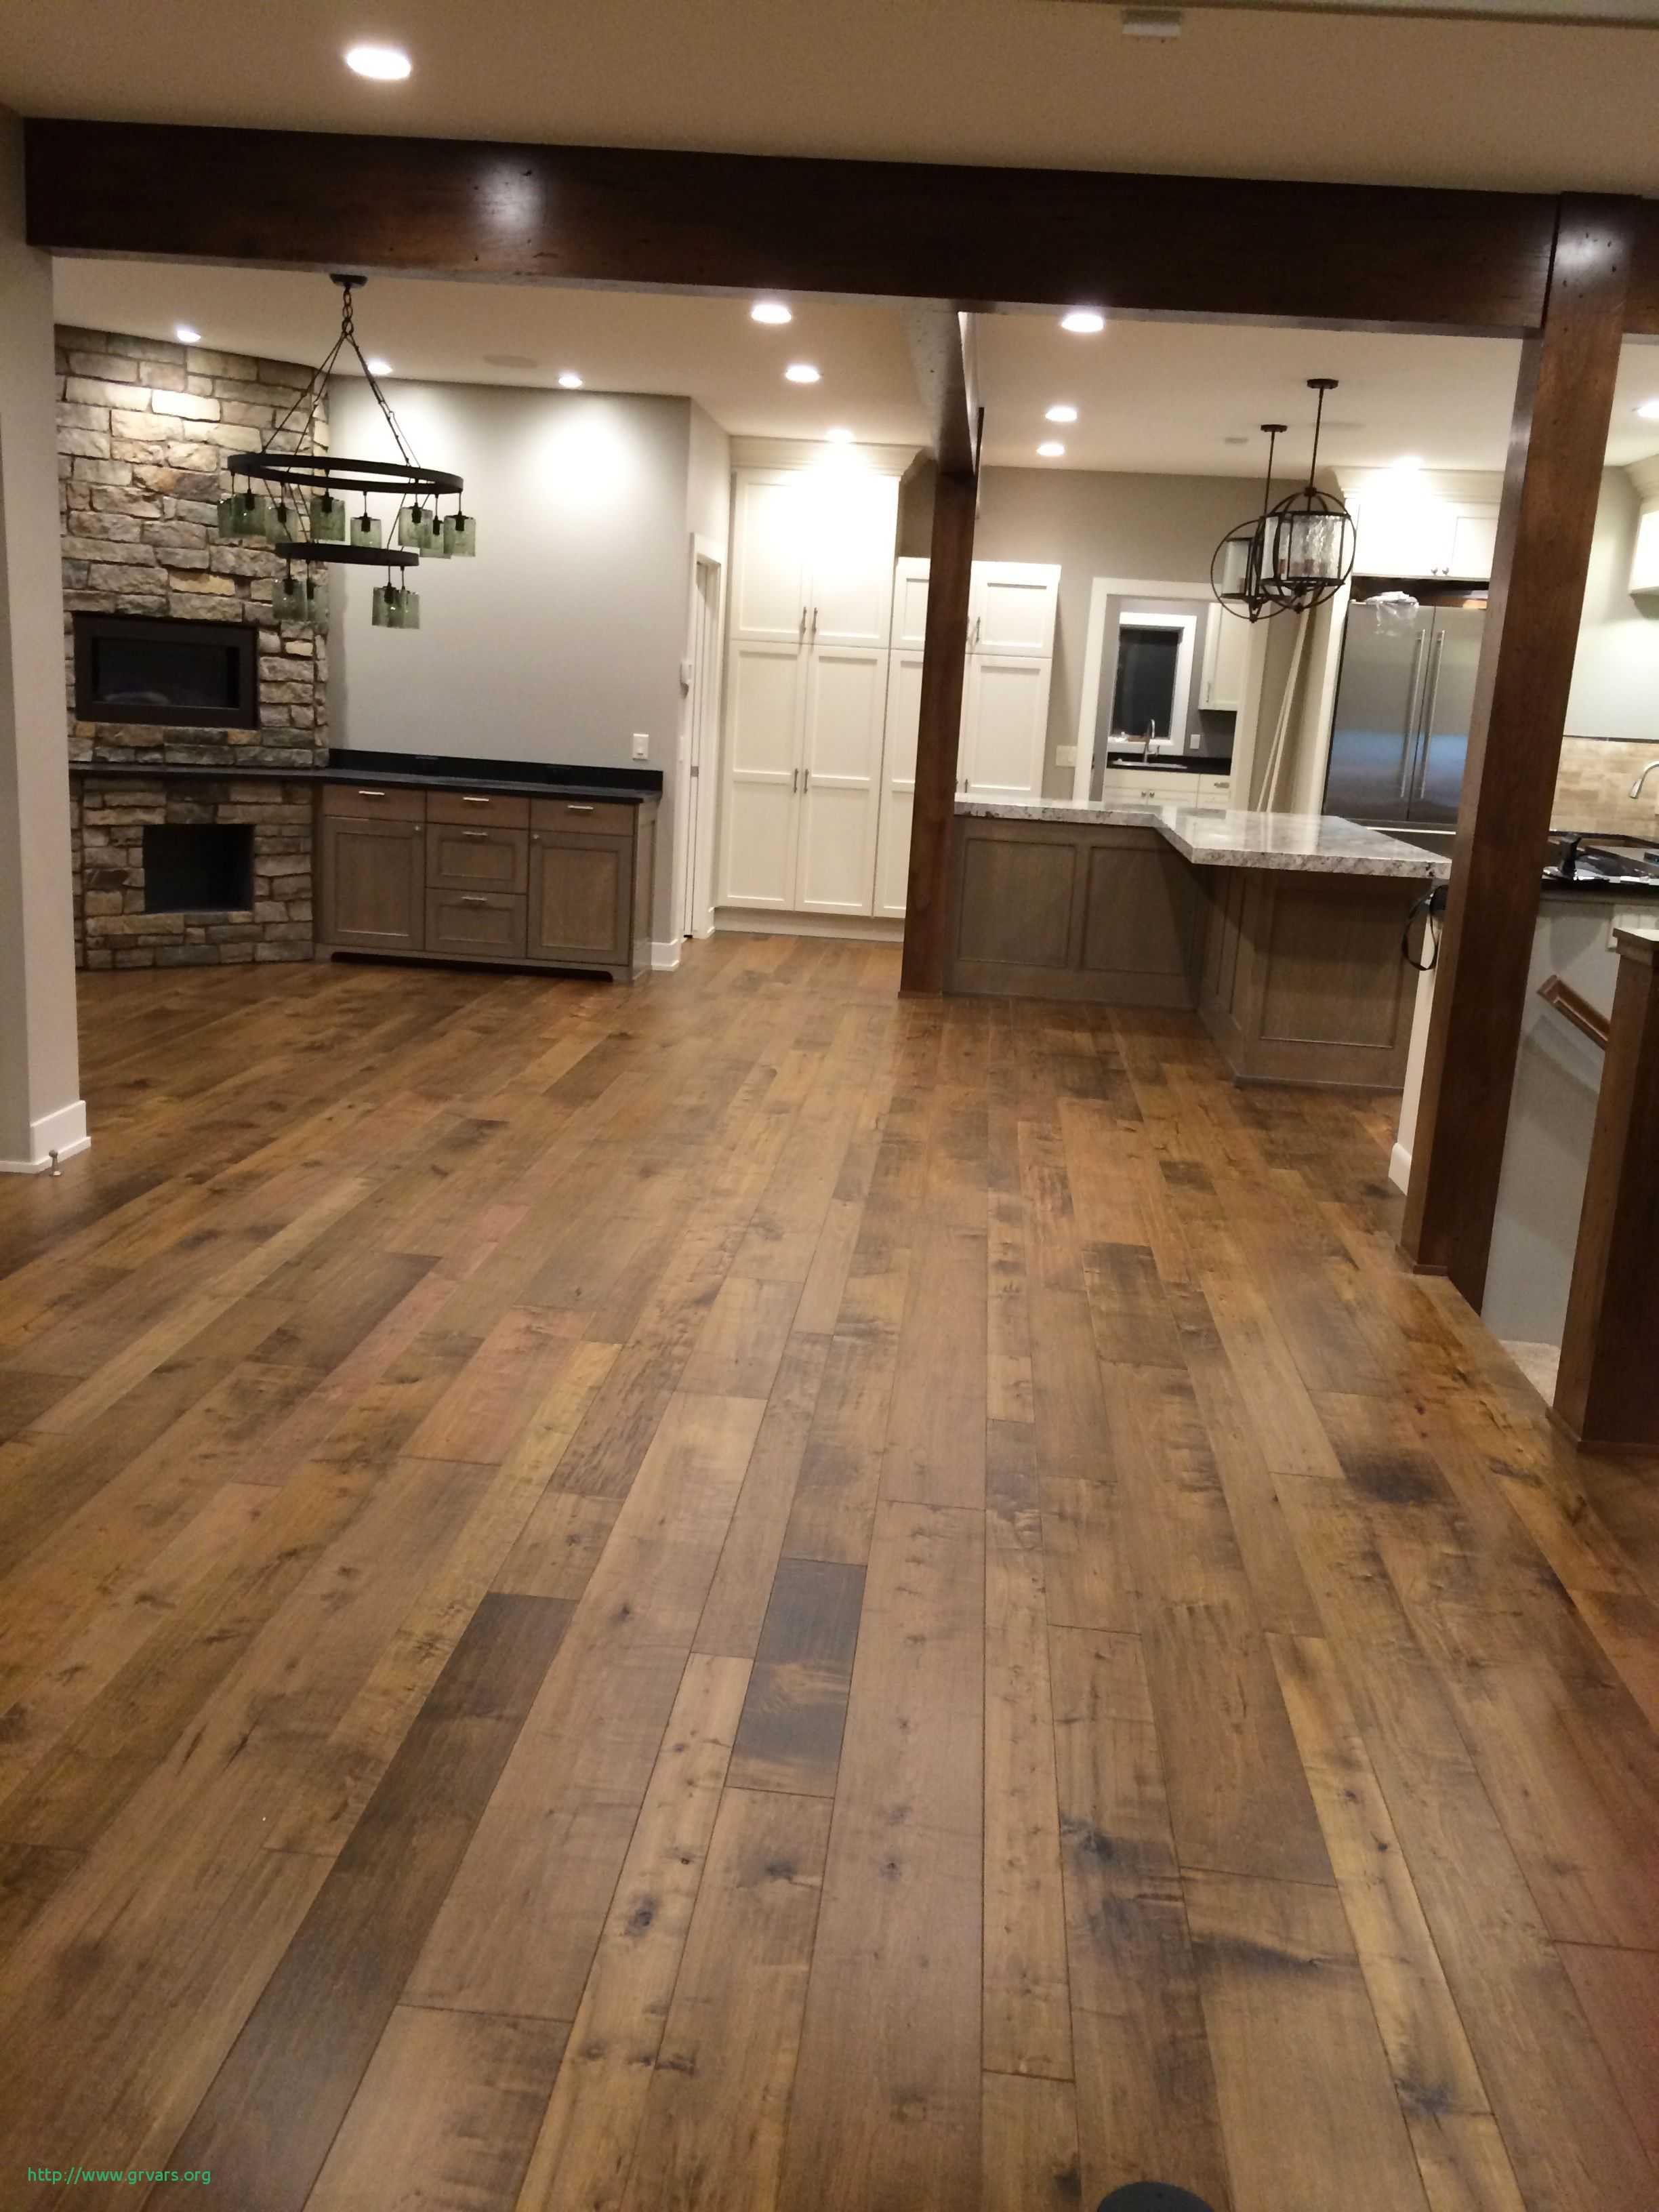 14 Nice Hardwood Floor Cleaning Greenville Sc 2024 free download hardwood floor cleaning greenville sc of 21 ac289lagant flooring stores in st louis mo ideas blog within flooring stores in st louis mo frais monterey hardwood collection rooms and spaces